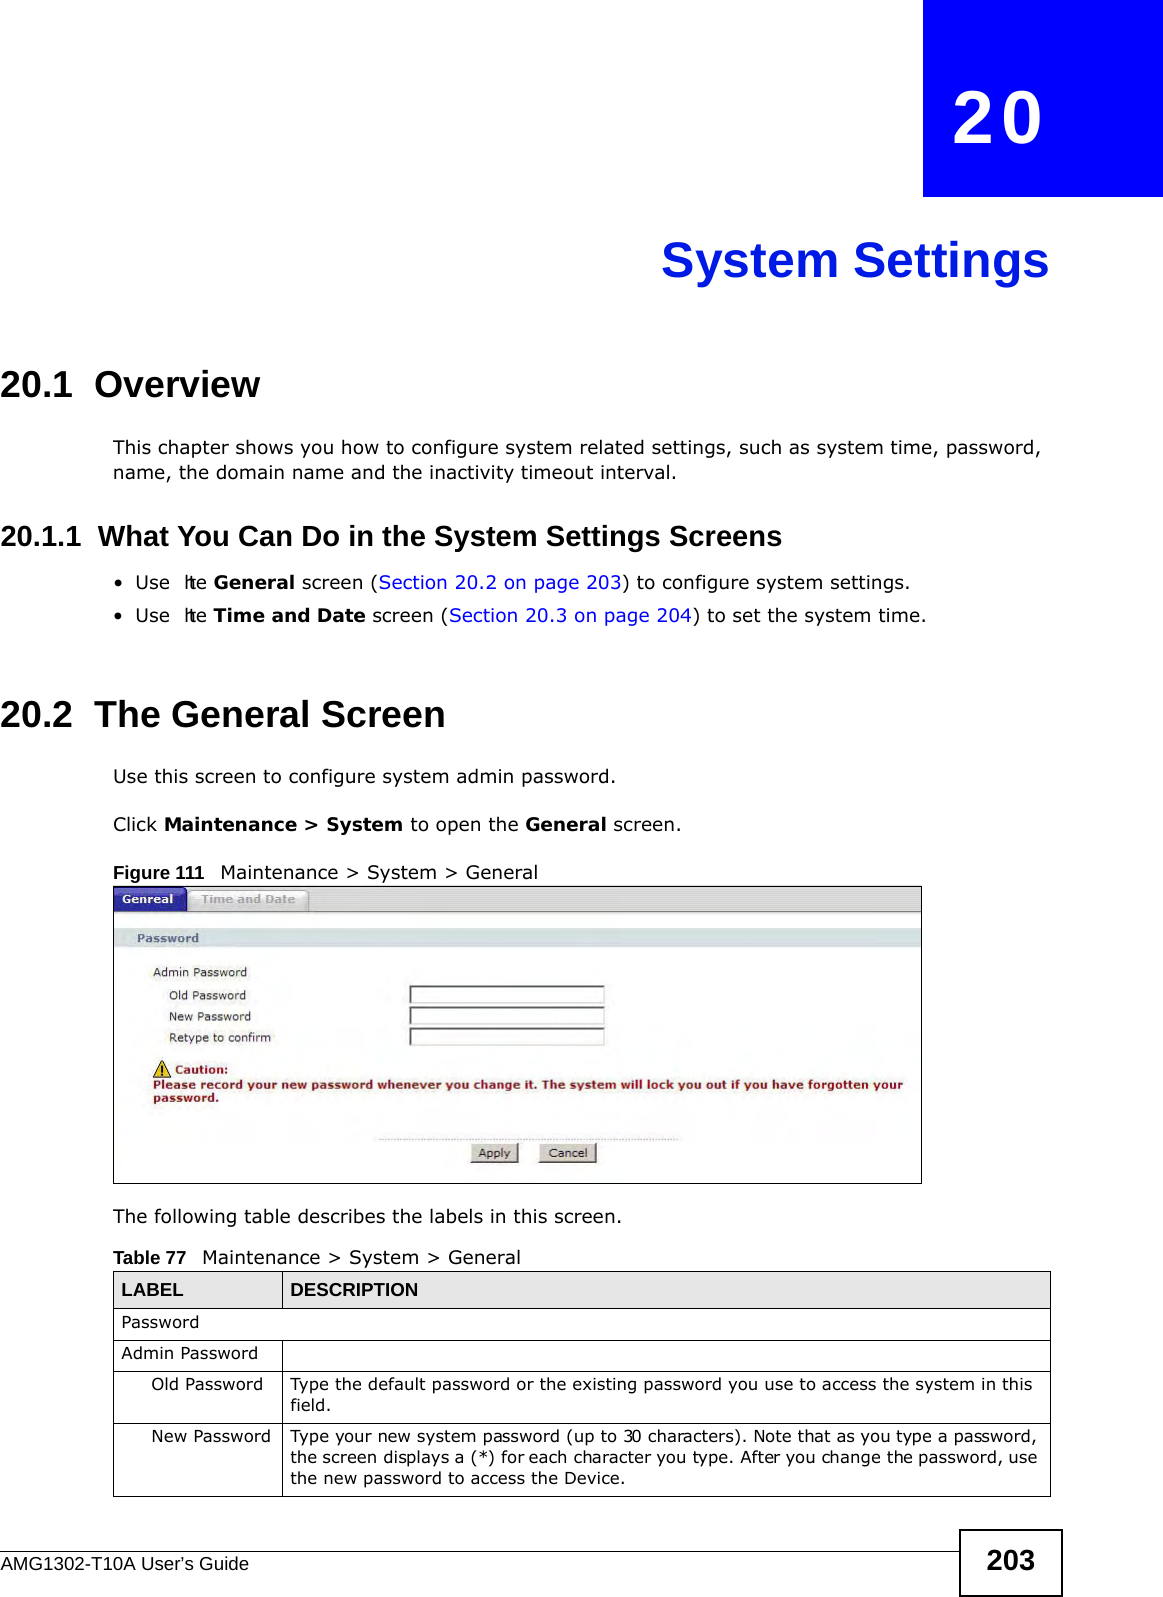 AMG1302-T10A User’s Guide 203CHAPTER   20System Settings20.1  OverviewThis chapter shows you how to configure system related settings, such as system time, password, name, the domain name and the inactivity timeout interval.    20.1.1  What You Can Do in the System Settings Screens•Use  the General screen (Section 20.2 on page 203) to configure system settings.•Use  the Time and Date screen (Section 20.3 on page 204) to set the system time.20.2  The General ScreenUse this screen to configure system admin password.Click Maintenance &gt; System to open the General screen. Figure 111   Maintenance &gt; System &gt; GeneralThe following table describes the labels in this screen. Table 77   Maintenance &gt; System &gt; GeneralLABEL DESCRIPTIONPasswordAdmin PasswordOld Password Type the default password or the existing password you use to access the system in this field.New Password Type your new system password (up to 30 characters). Note that as you type a password, the screen displays a (*) for each character you type. After you change the password, use the new password to access the Device.